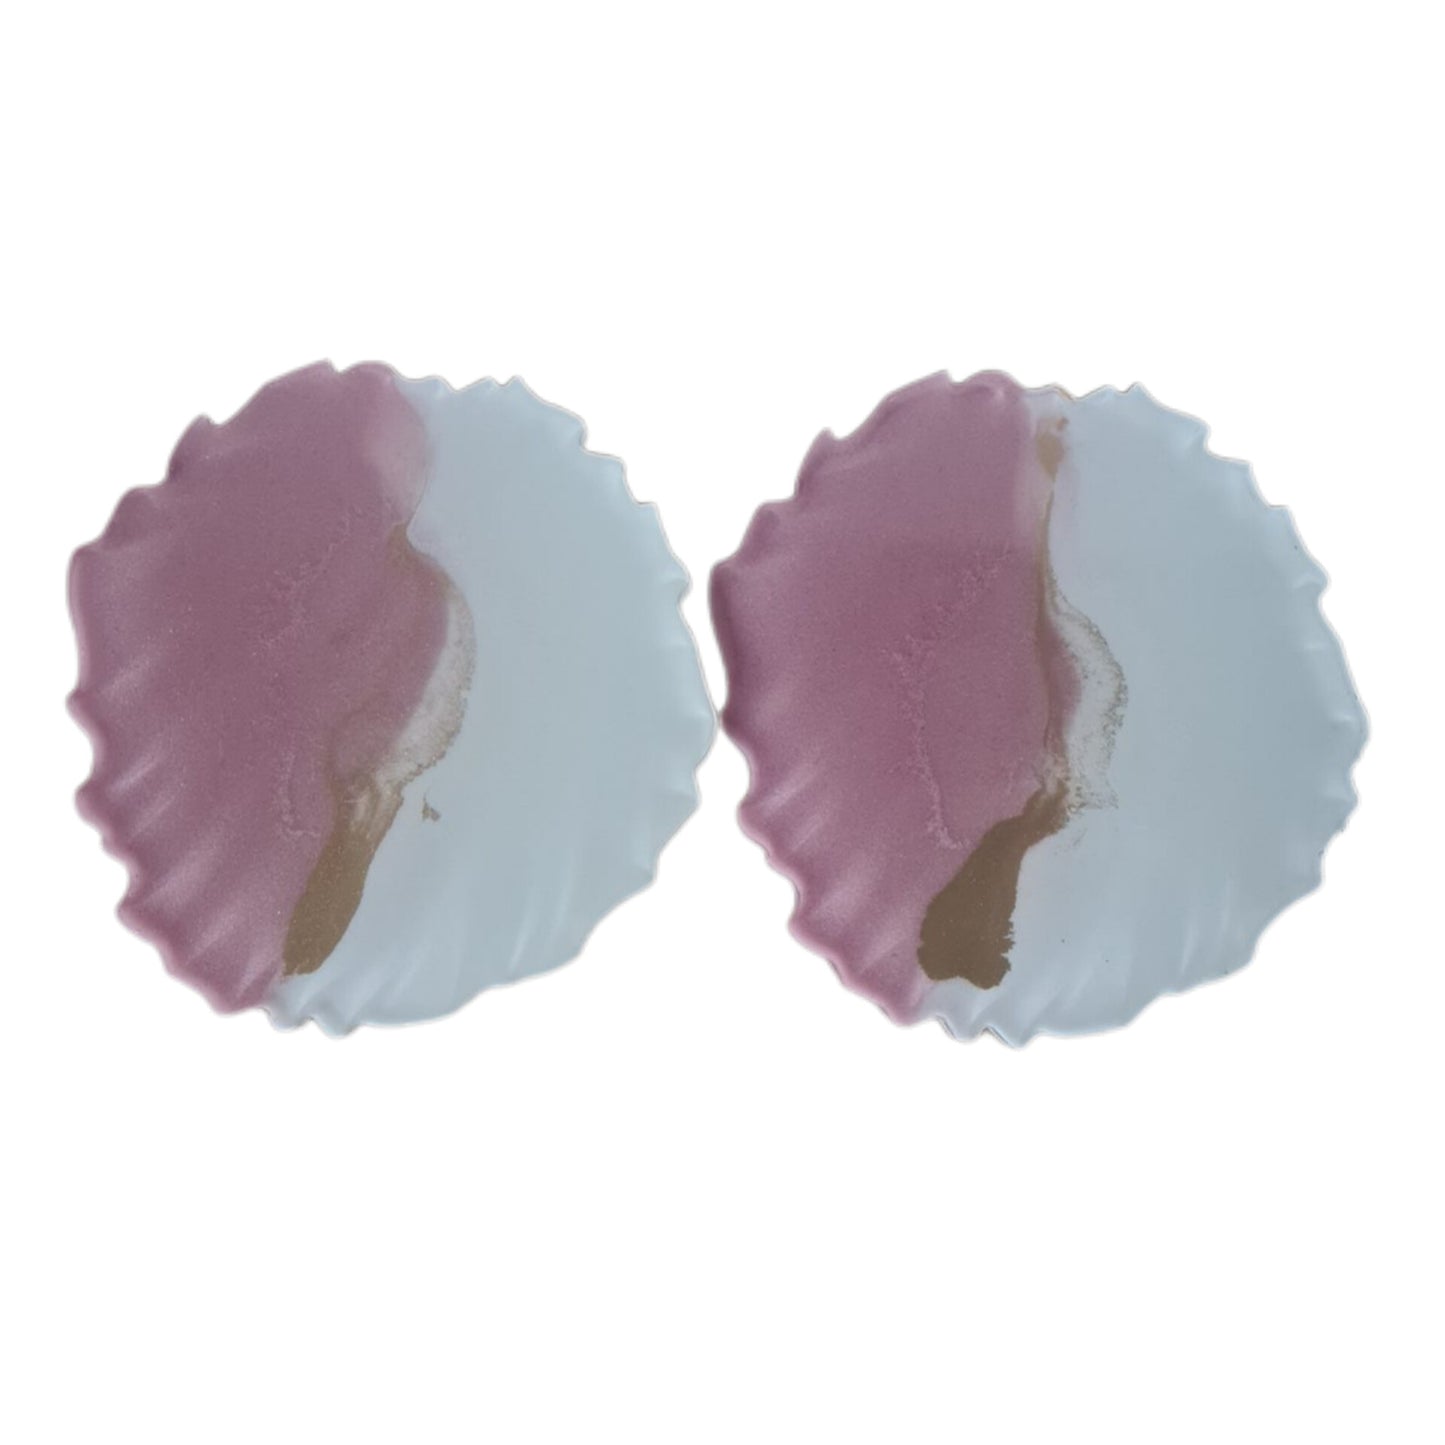 Blush Pink, White and Gold Resin Agate Coaster Set